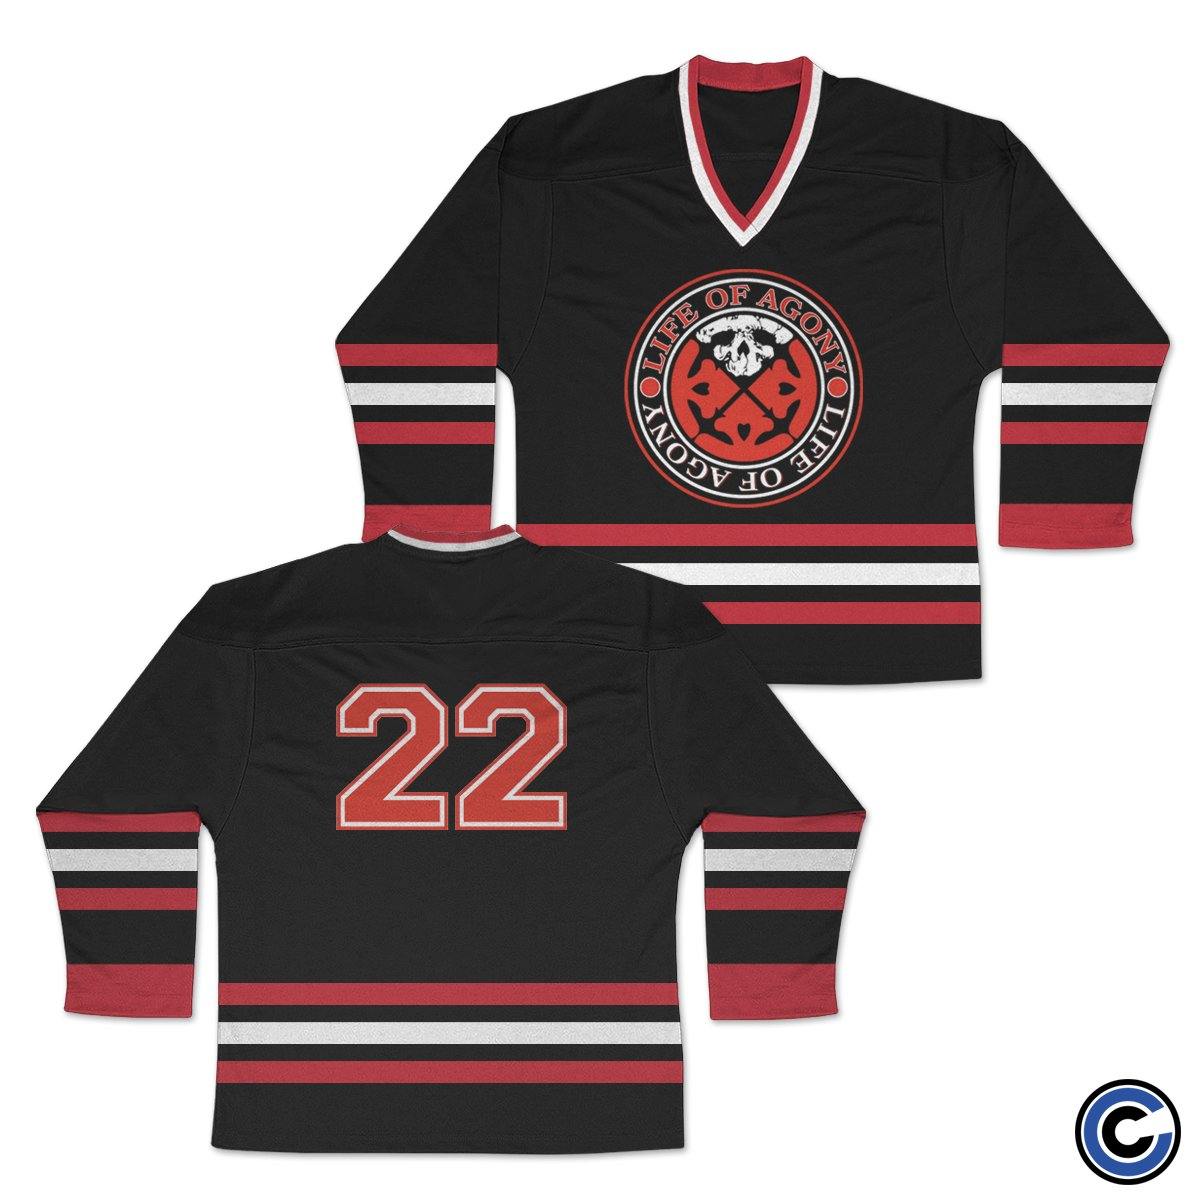 Buy – Life of Agony "22" Hockey Jersey – Band & Music Merch – Cold Cuts Merch